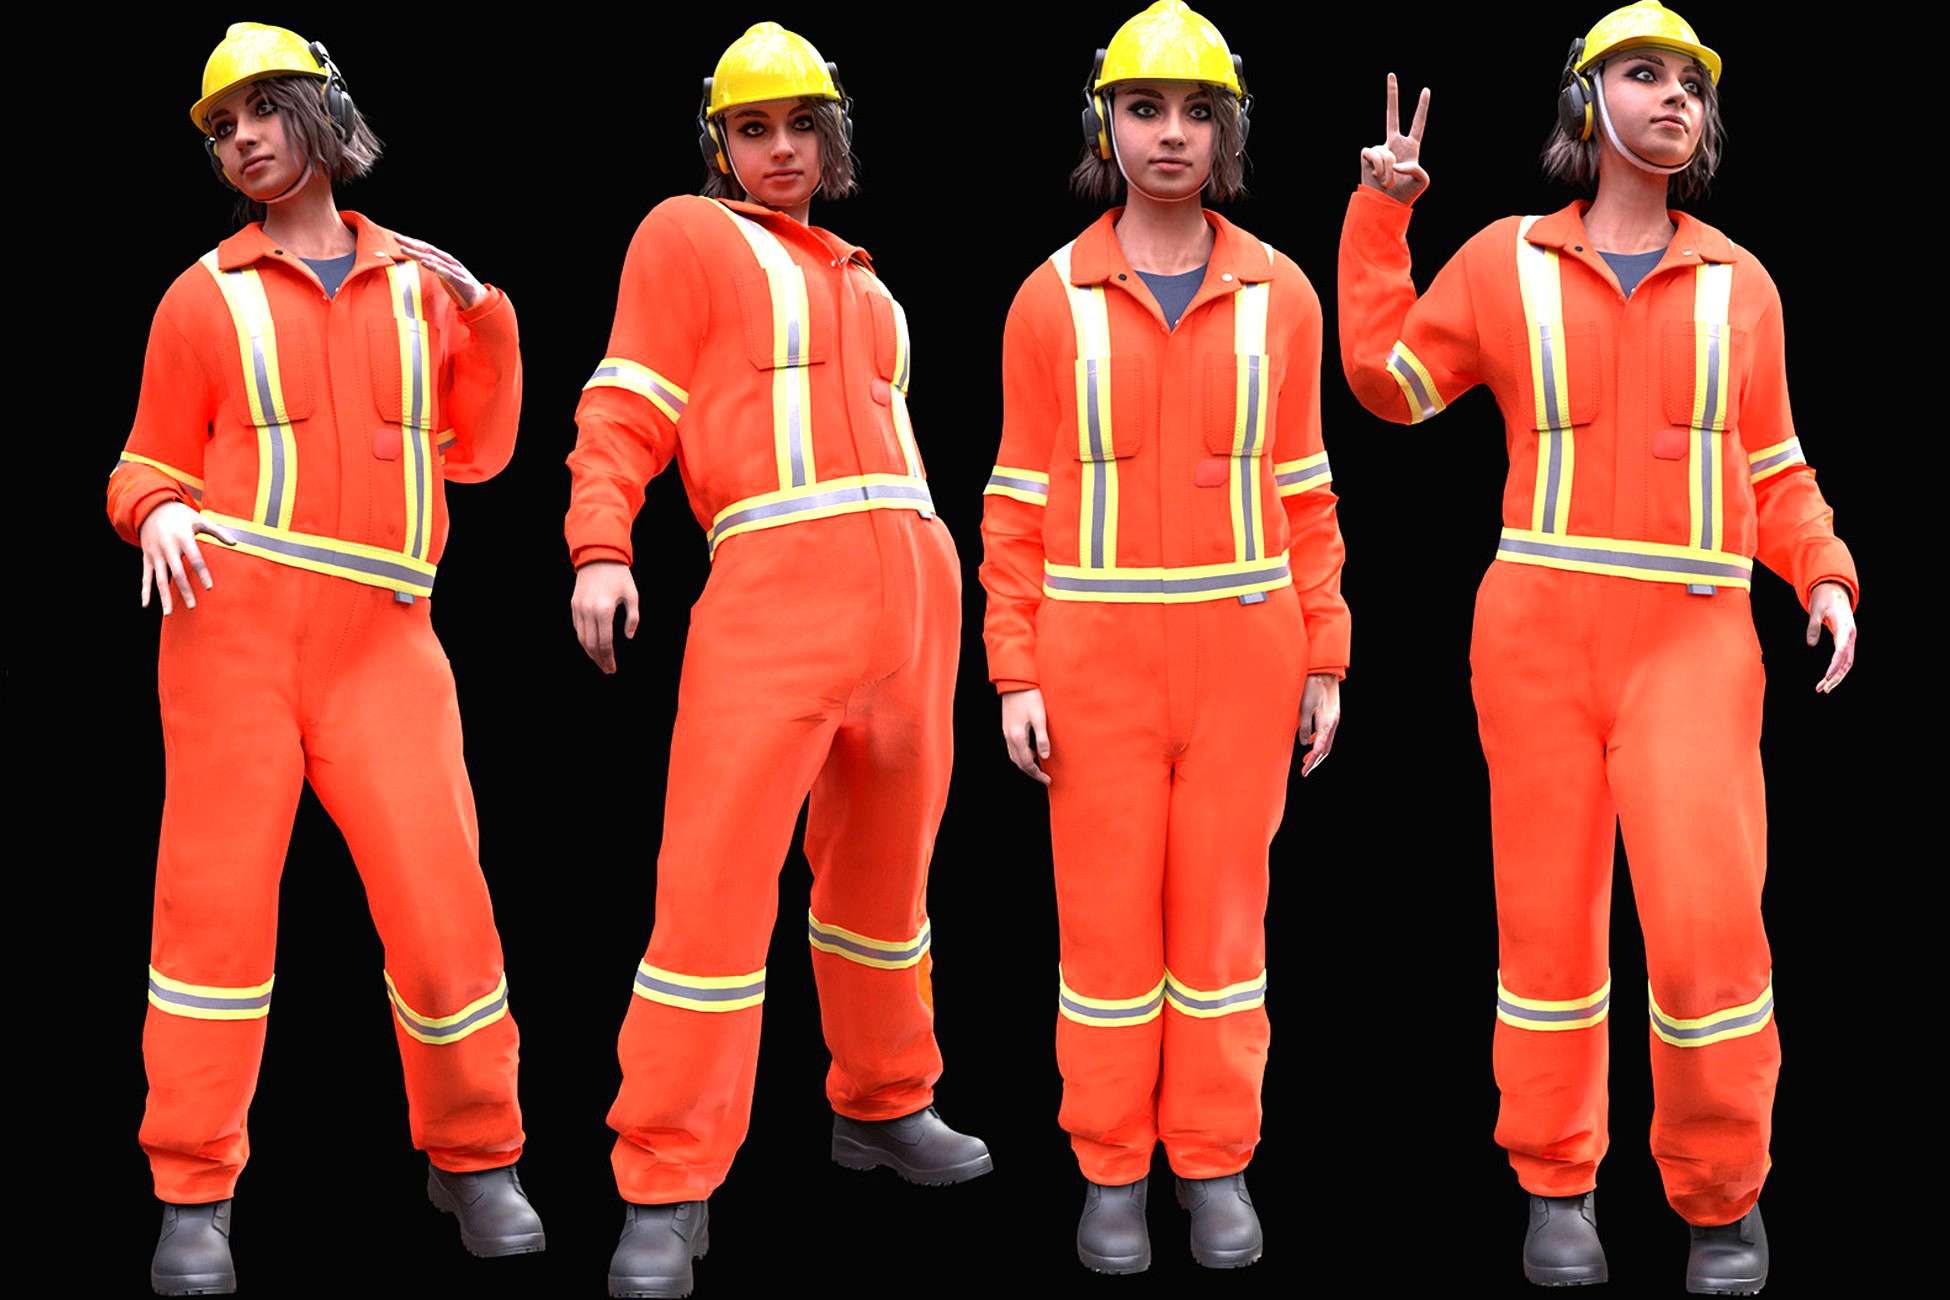 Collection 21 - Man/Woman in Mining Outfit - Rigged